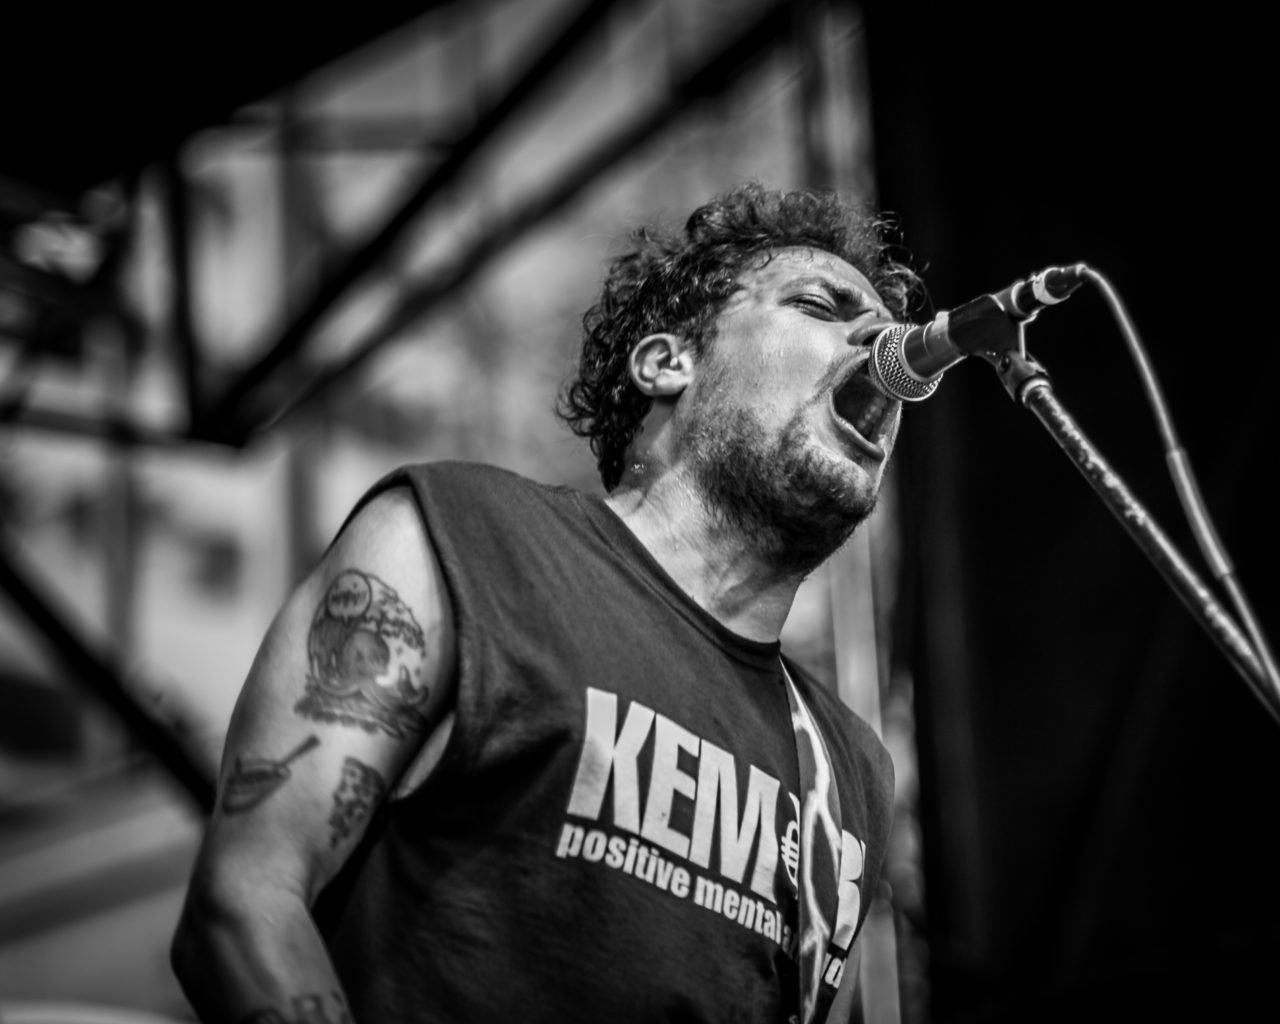 Jeff Rosenstock performing at 80/35 Music Festival 2018 in Des Moines, Iowa